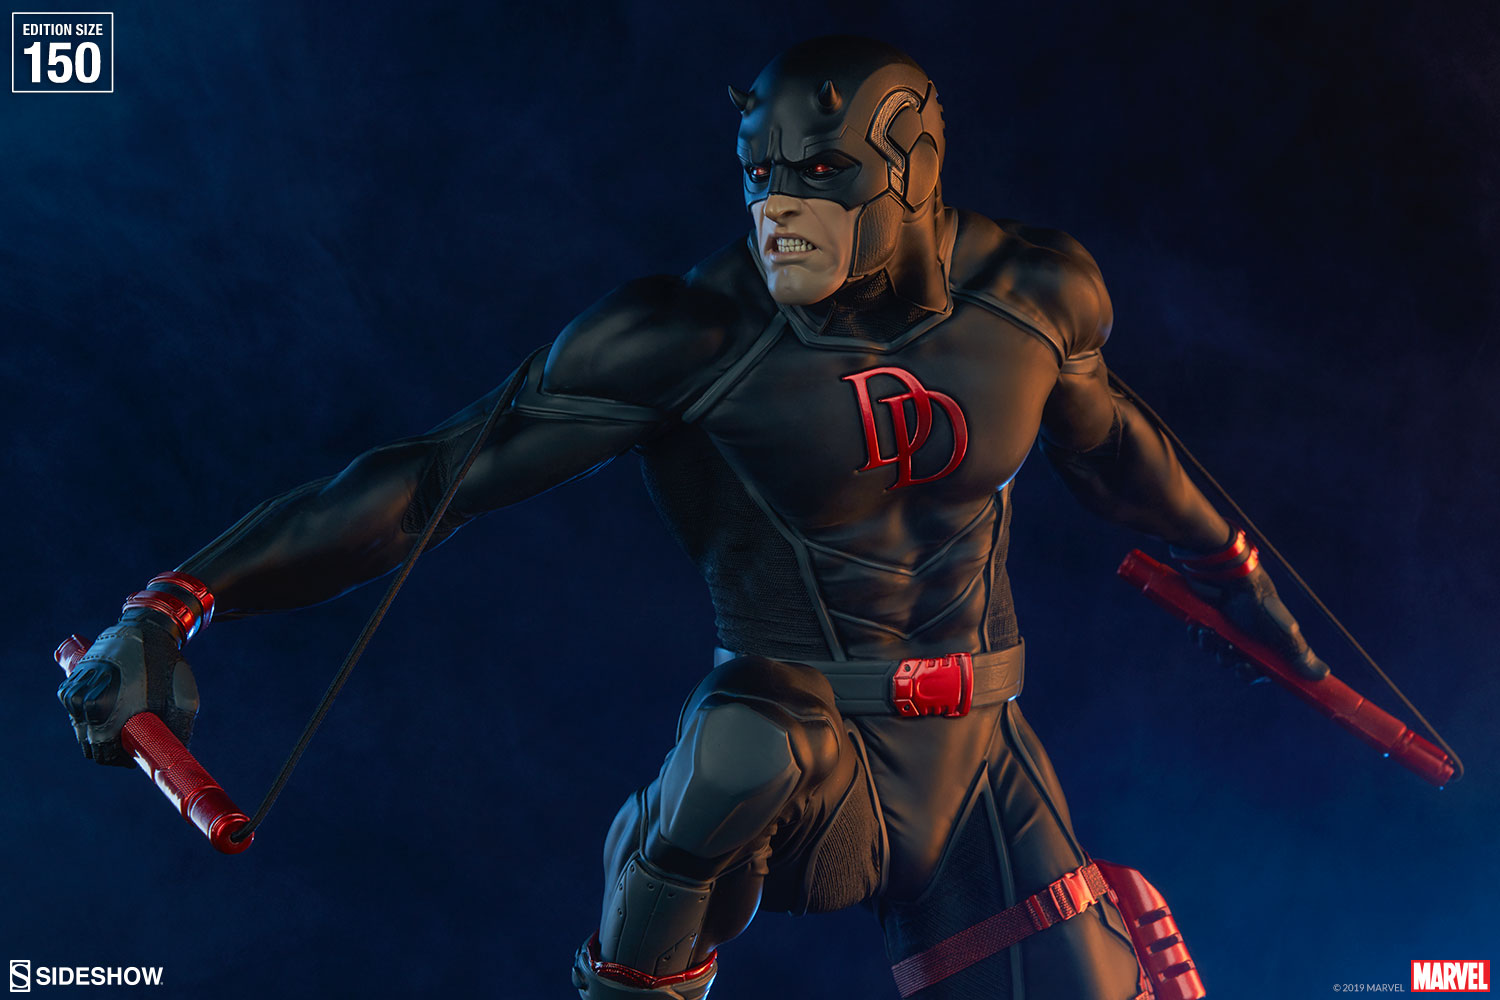 https://www.sideshow.com/storage/product-images/3005392/daredevil-shadowlands_marvel_gallery_5ce6d41a09b2f.jpg